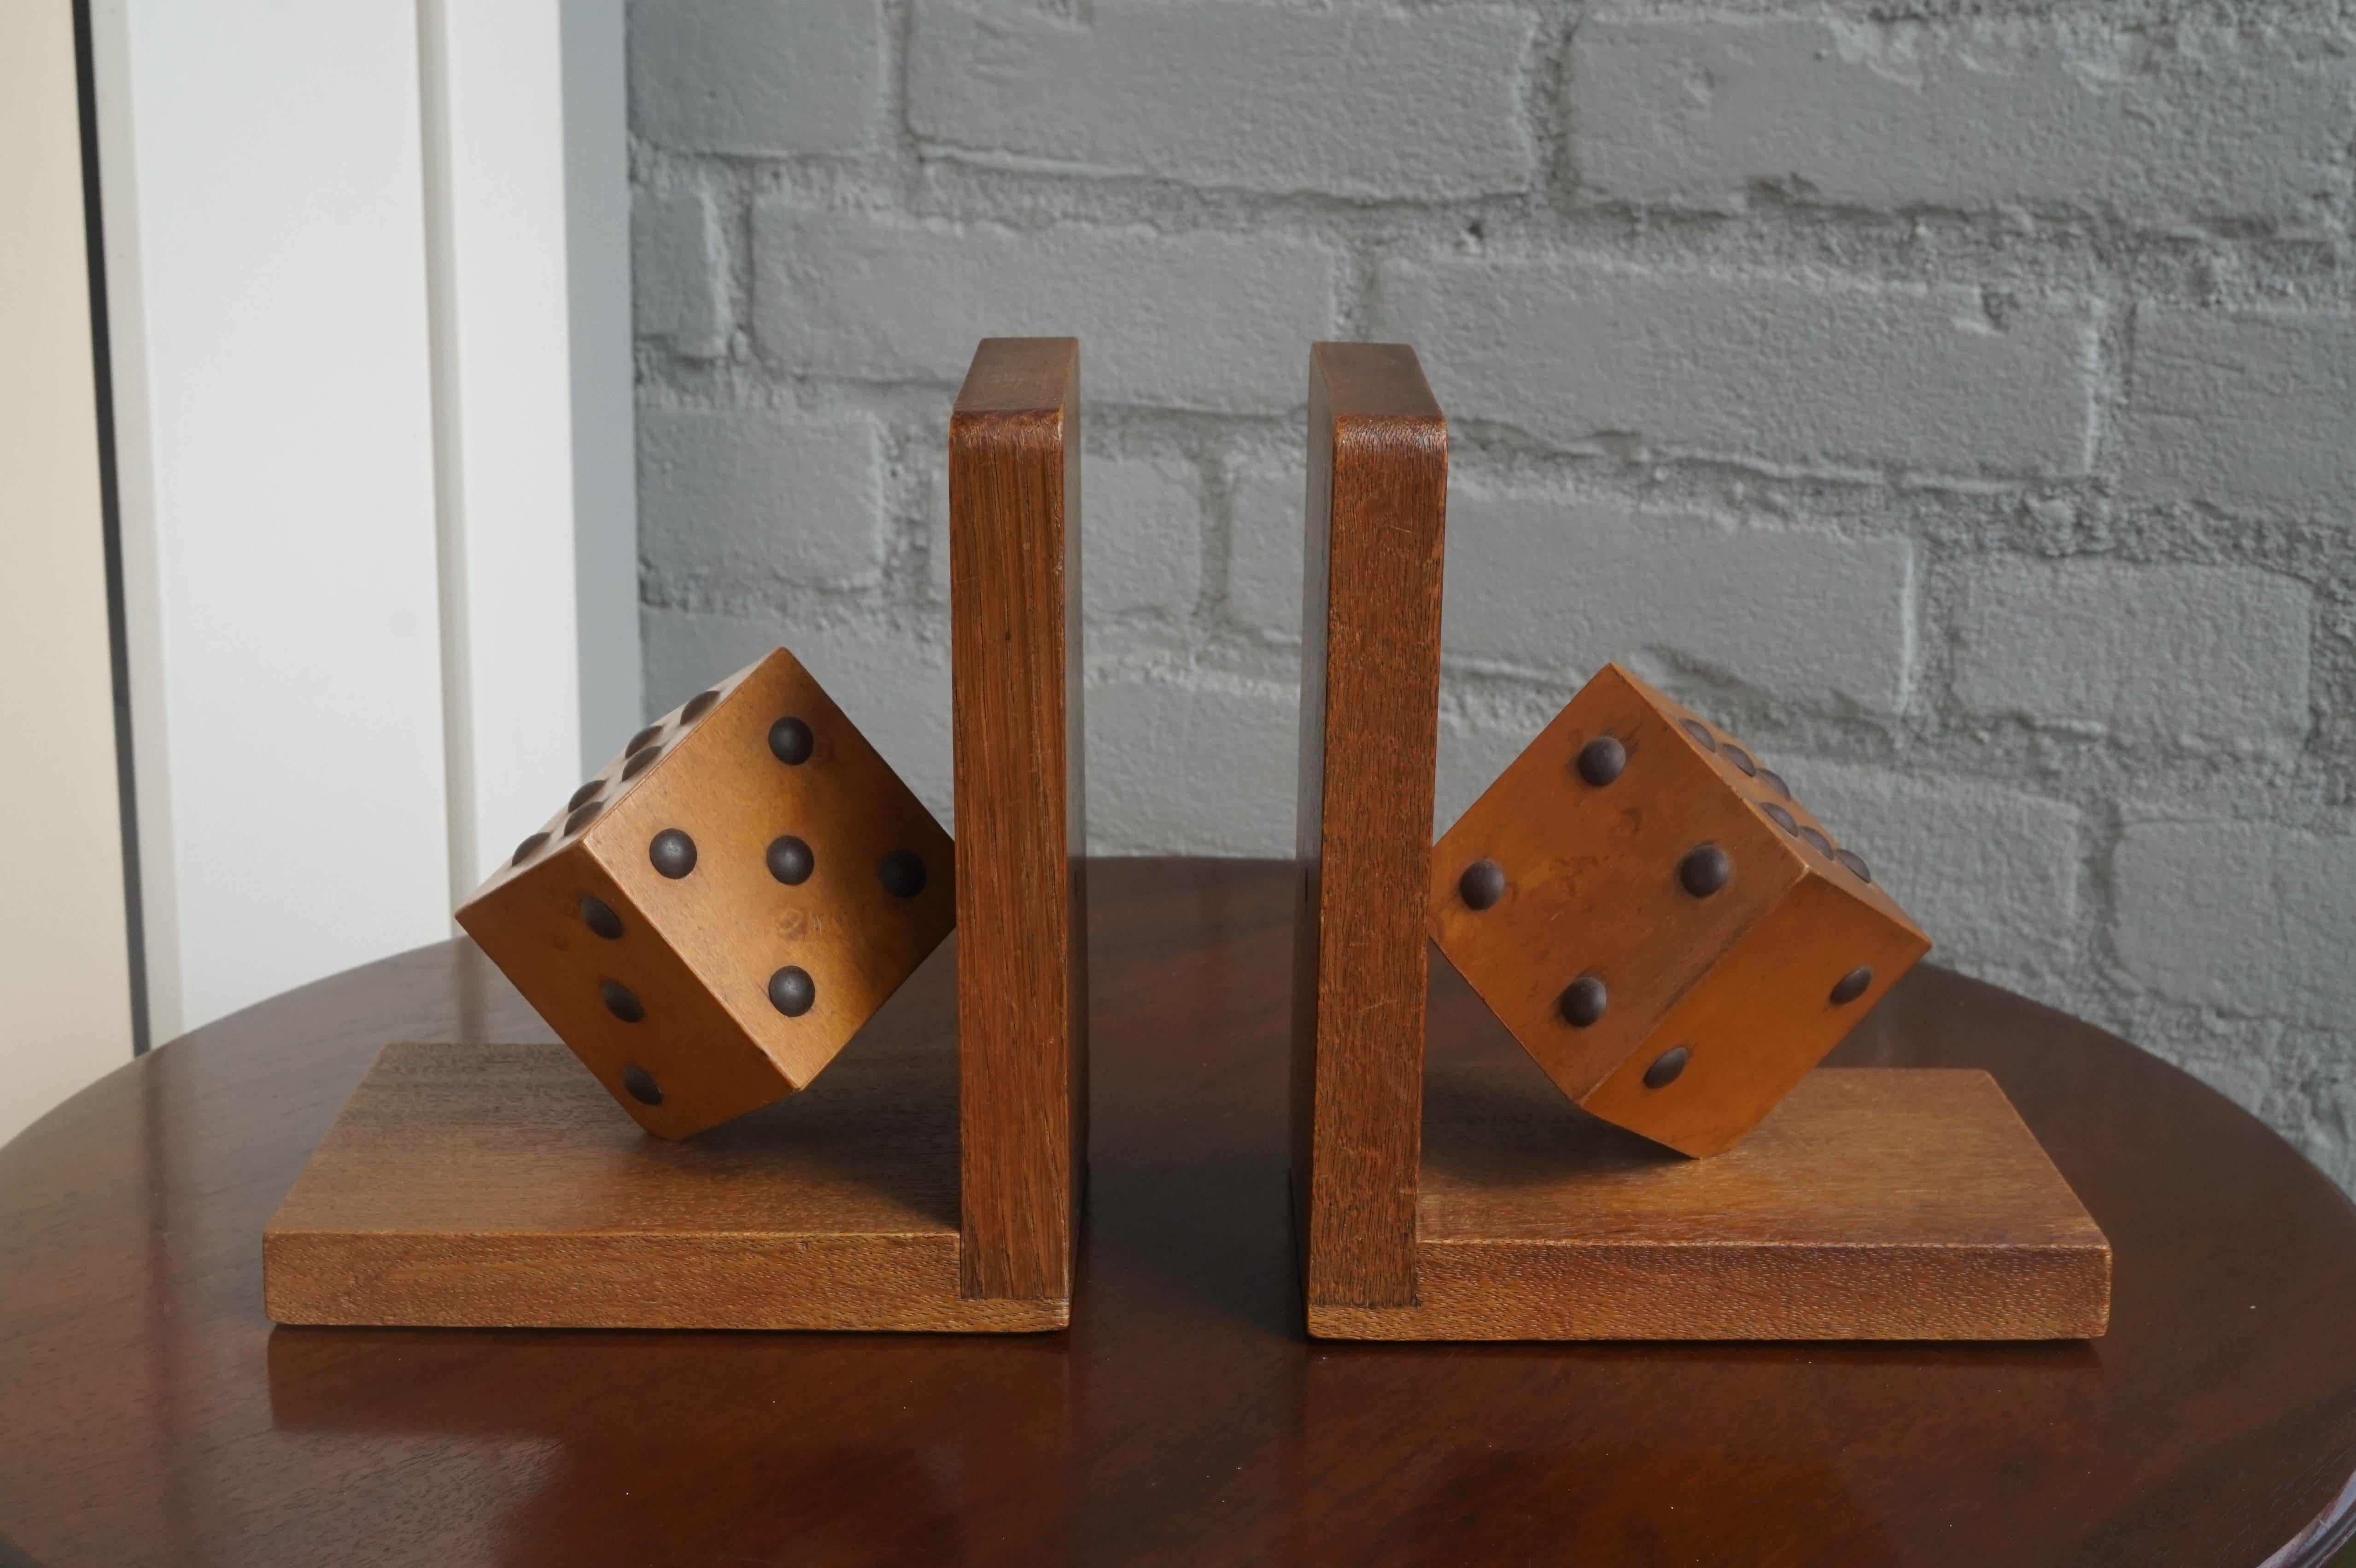 European Arts & Crafts Pair of Wooden Dice with Metal Nails Bookends for The Gamblers